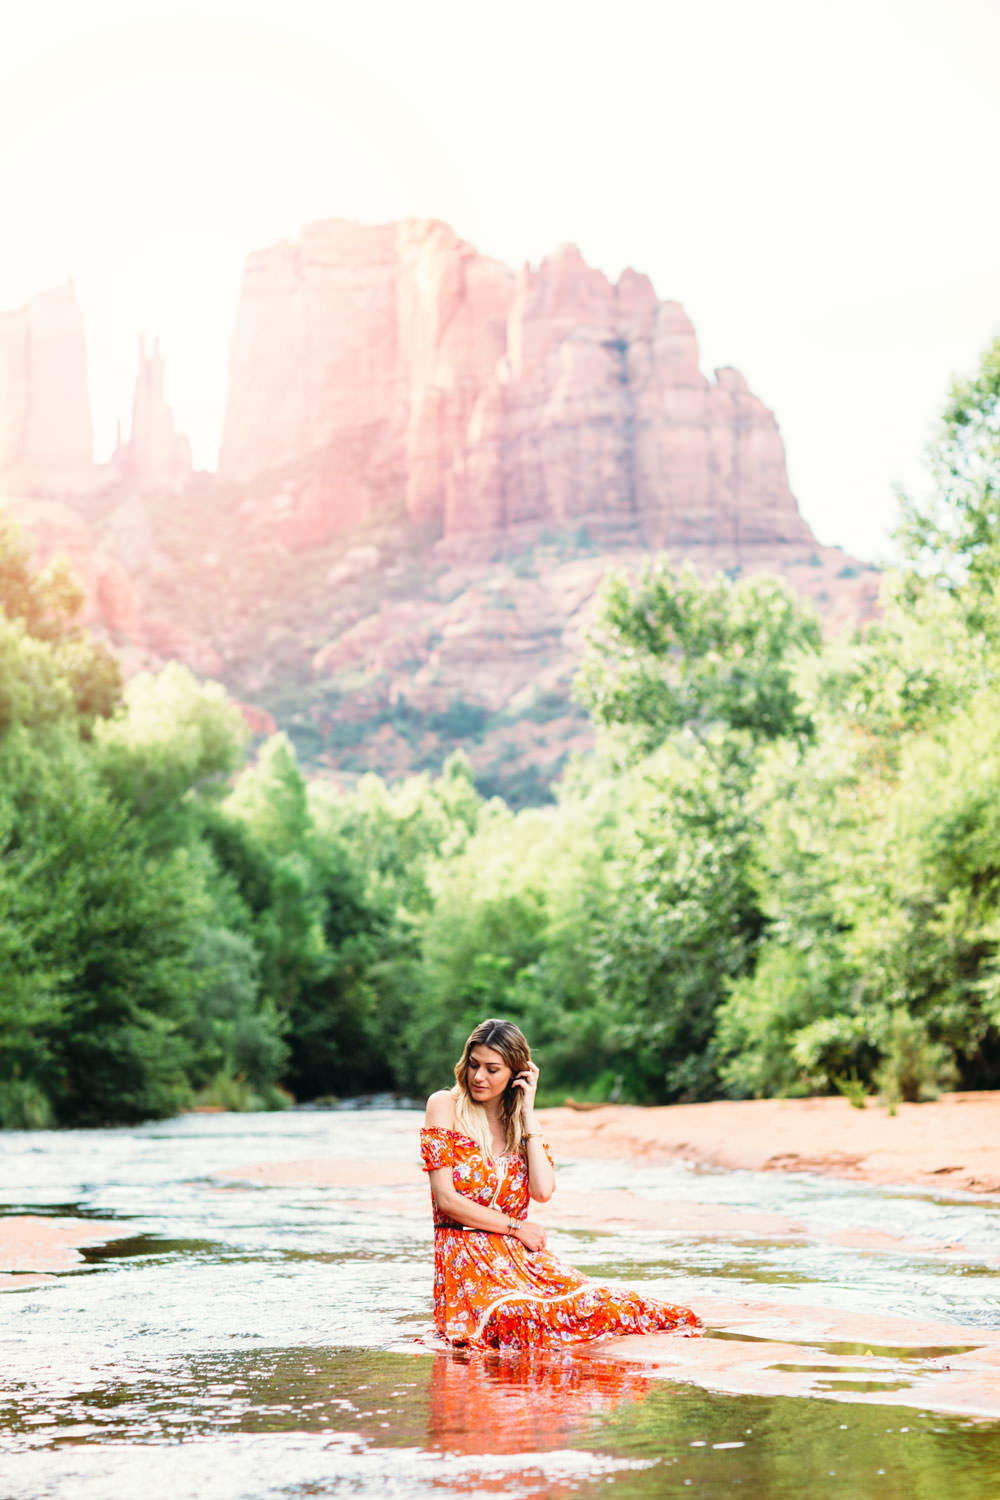 Dash of Darling styles an off shoulder floral dress by Spell Designs while exploring Cathedral Rock in Sedona Arizona